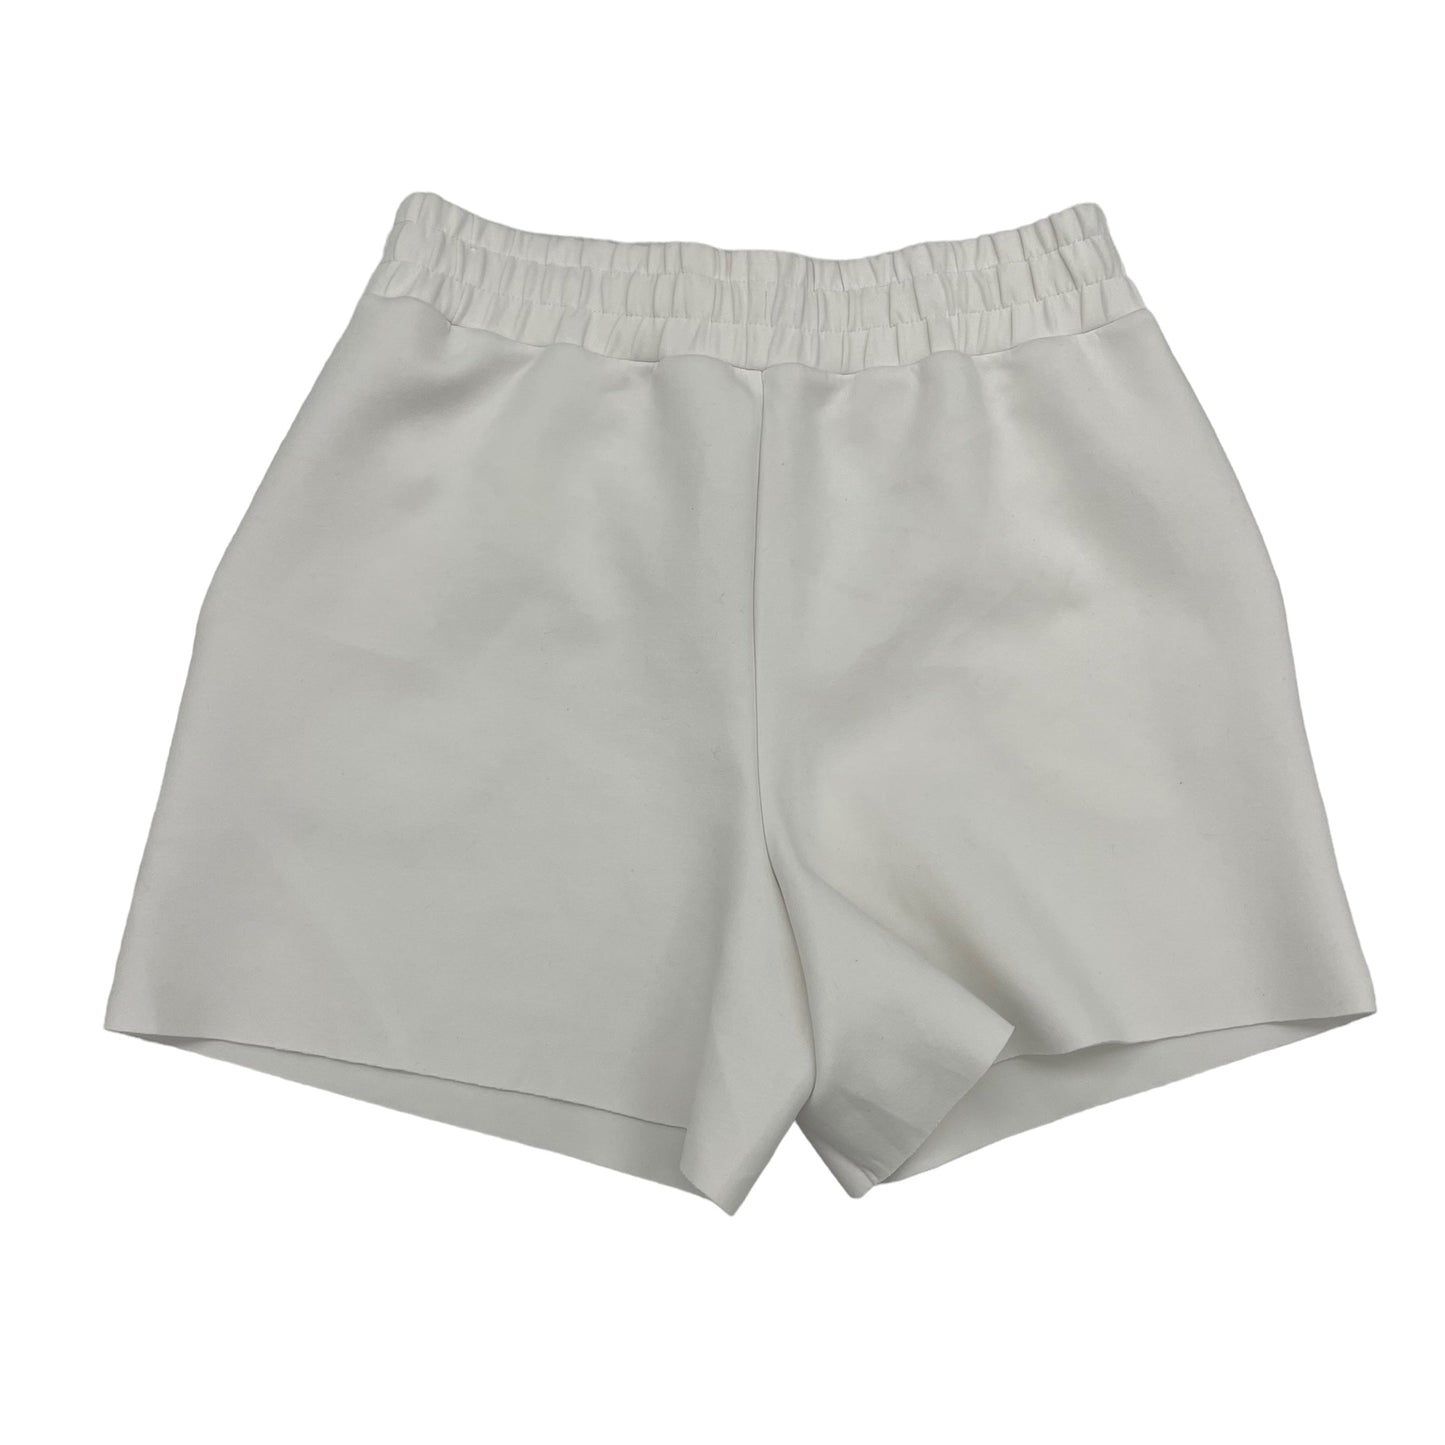 Shorts By Calia  Size: M